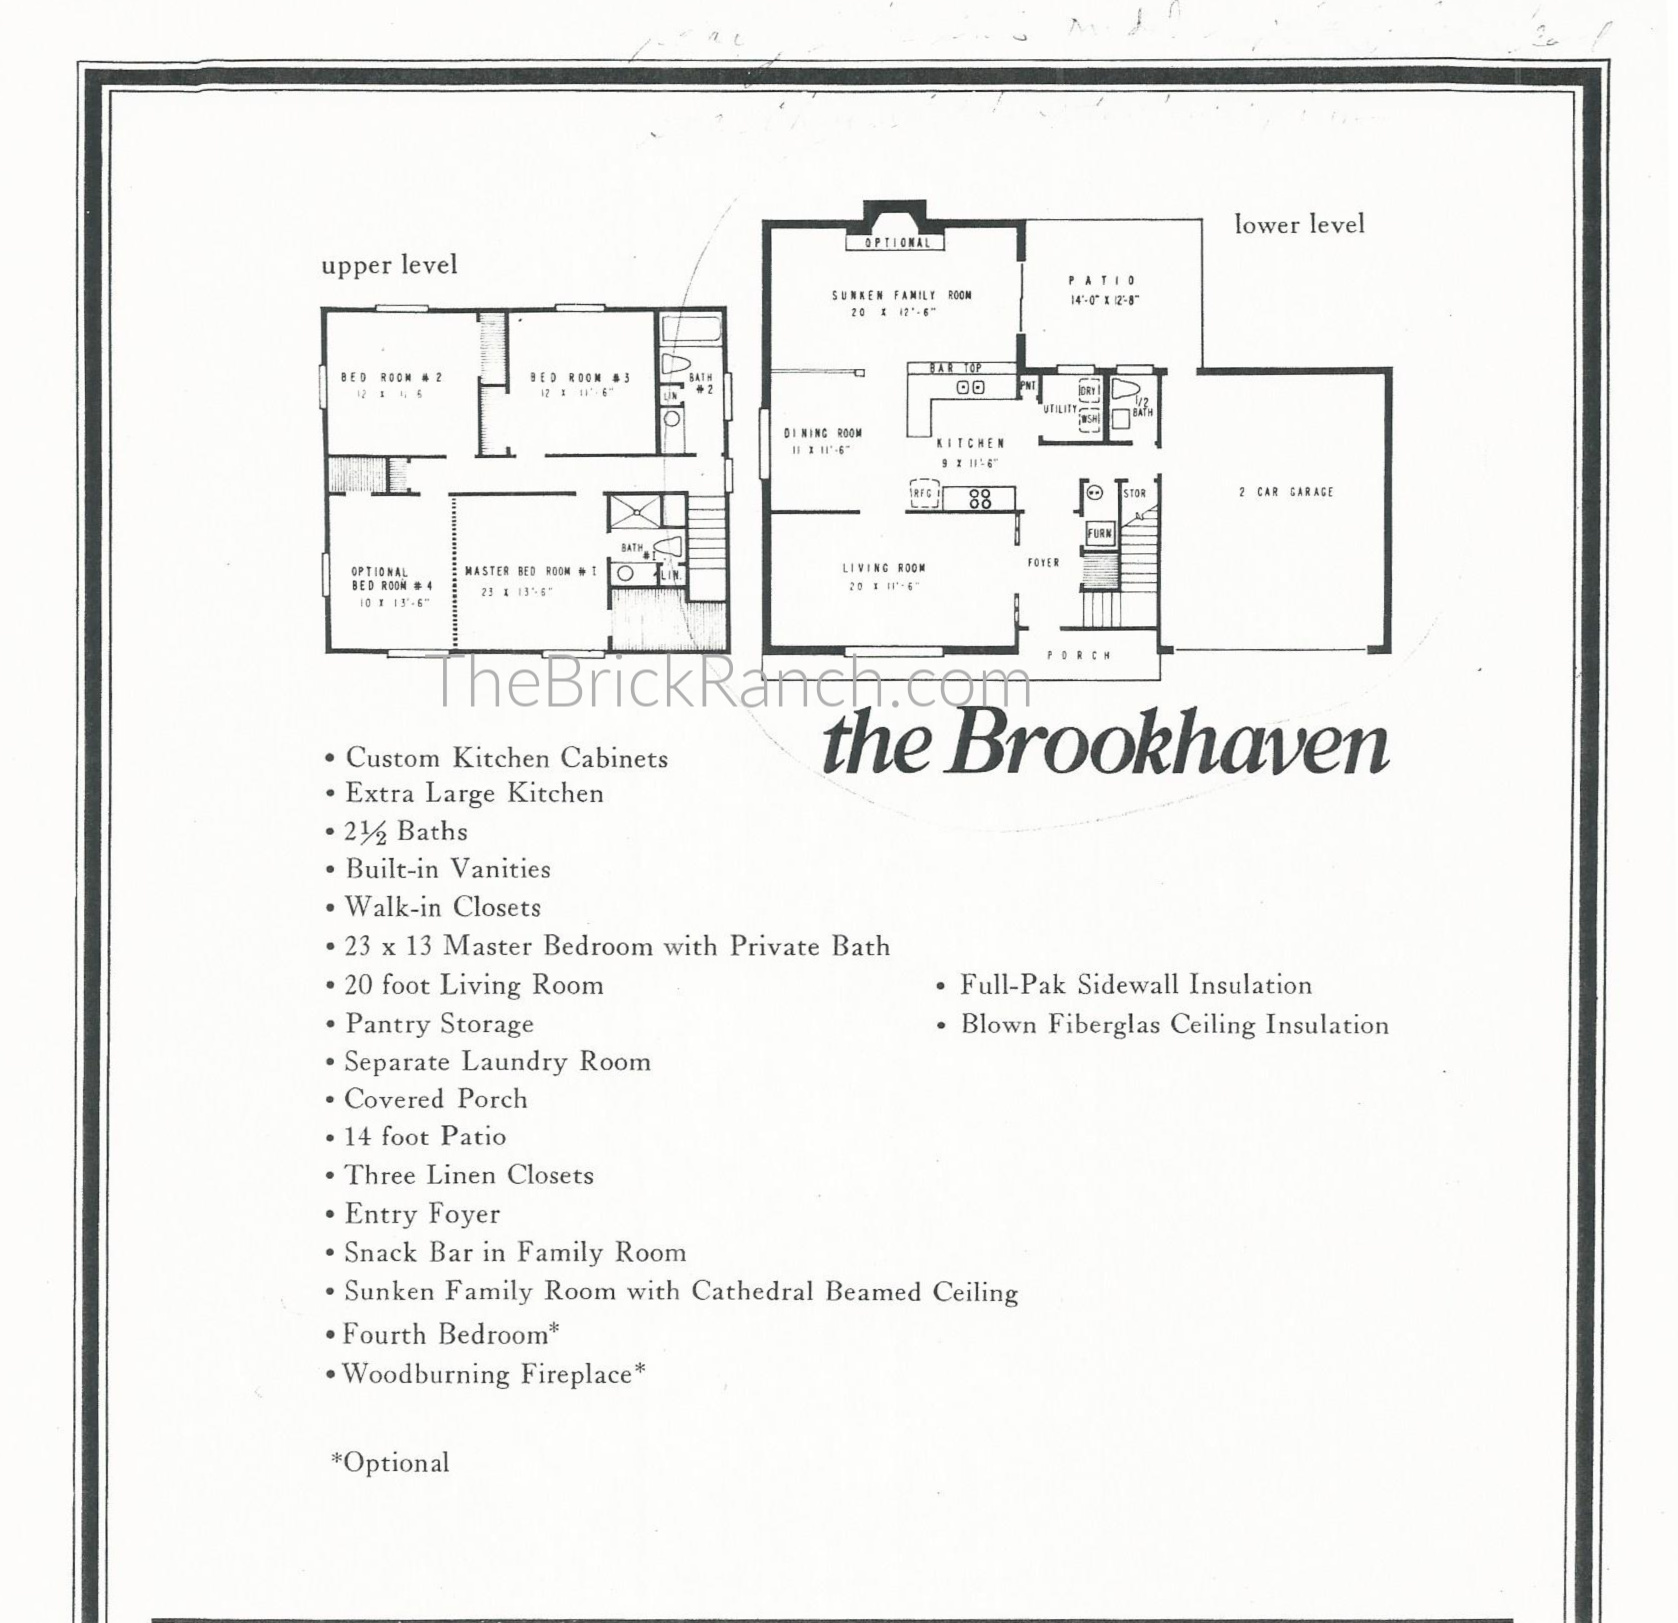 Huber Home Models: The Brookhaven